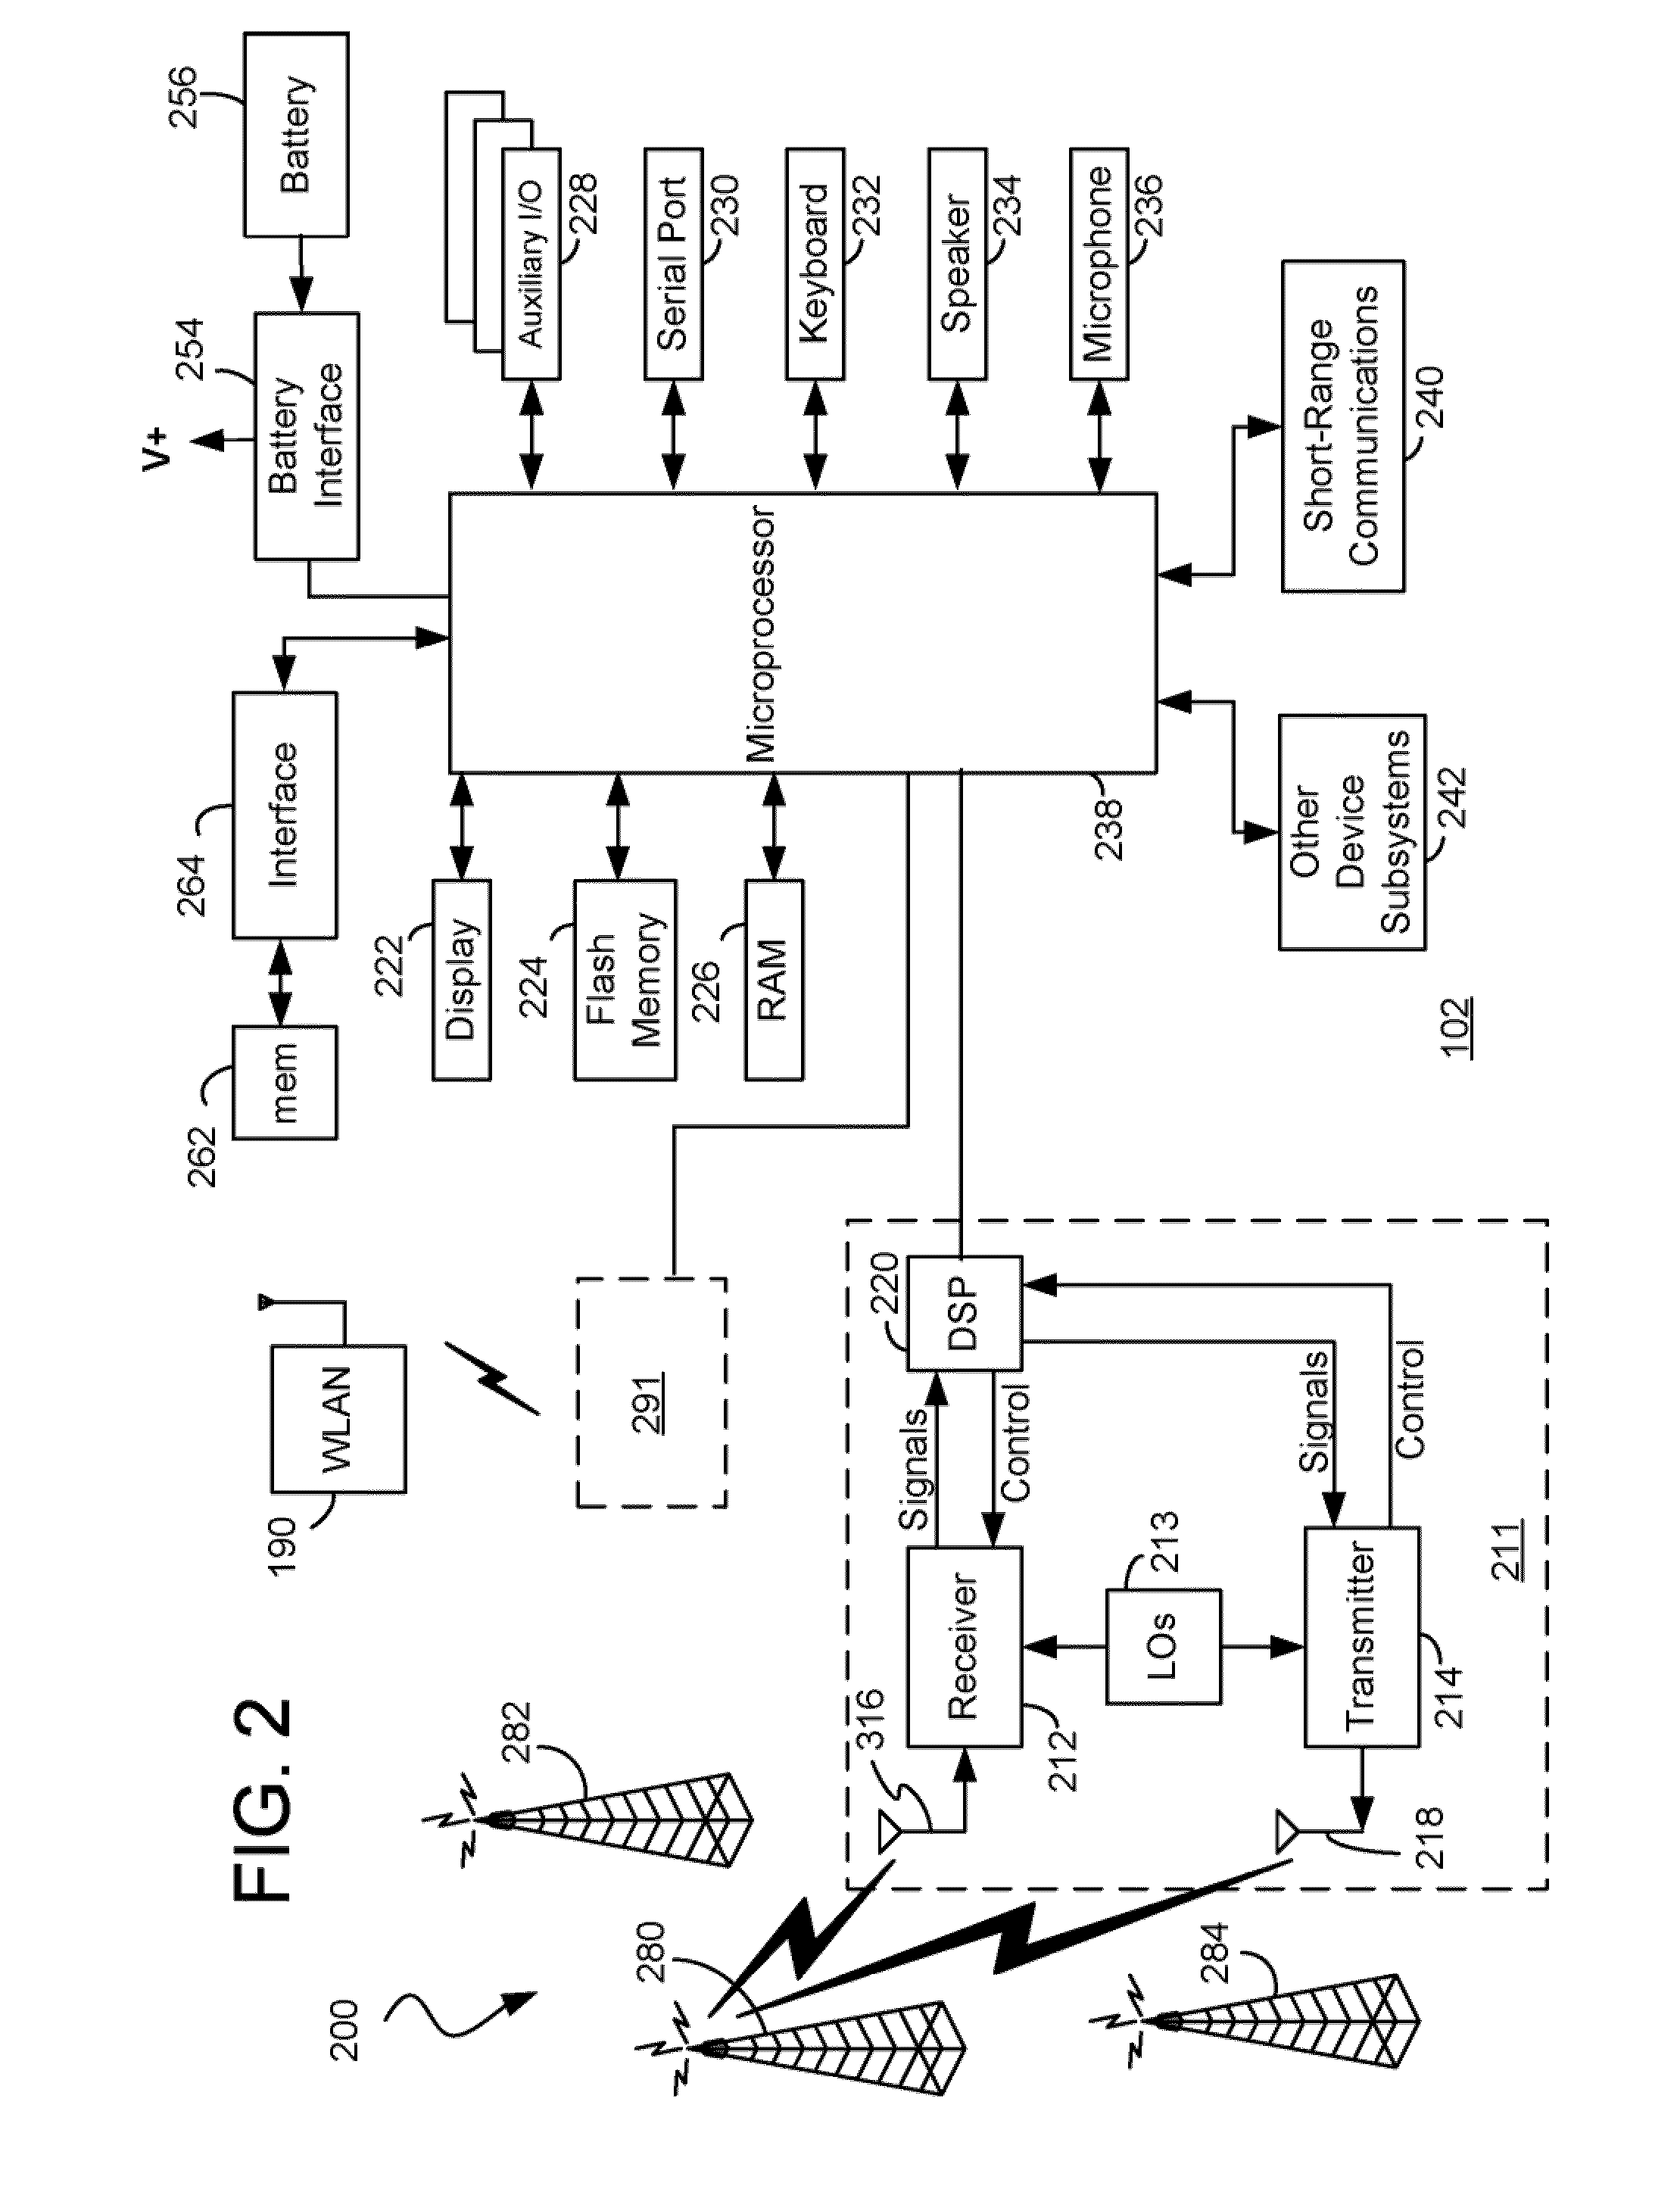 Signal Quality Determination Methods And Apparatus Suitable For Use In WLAN-To-WWAN Transitioning